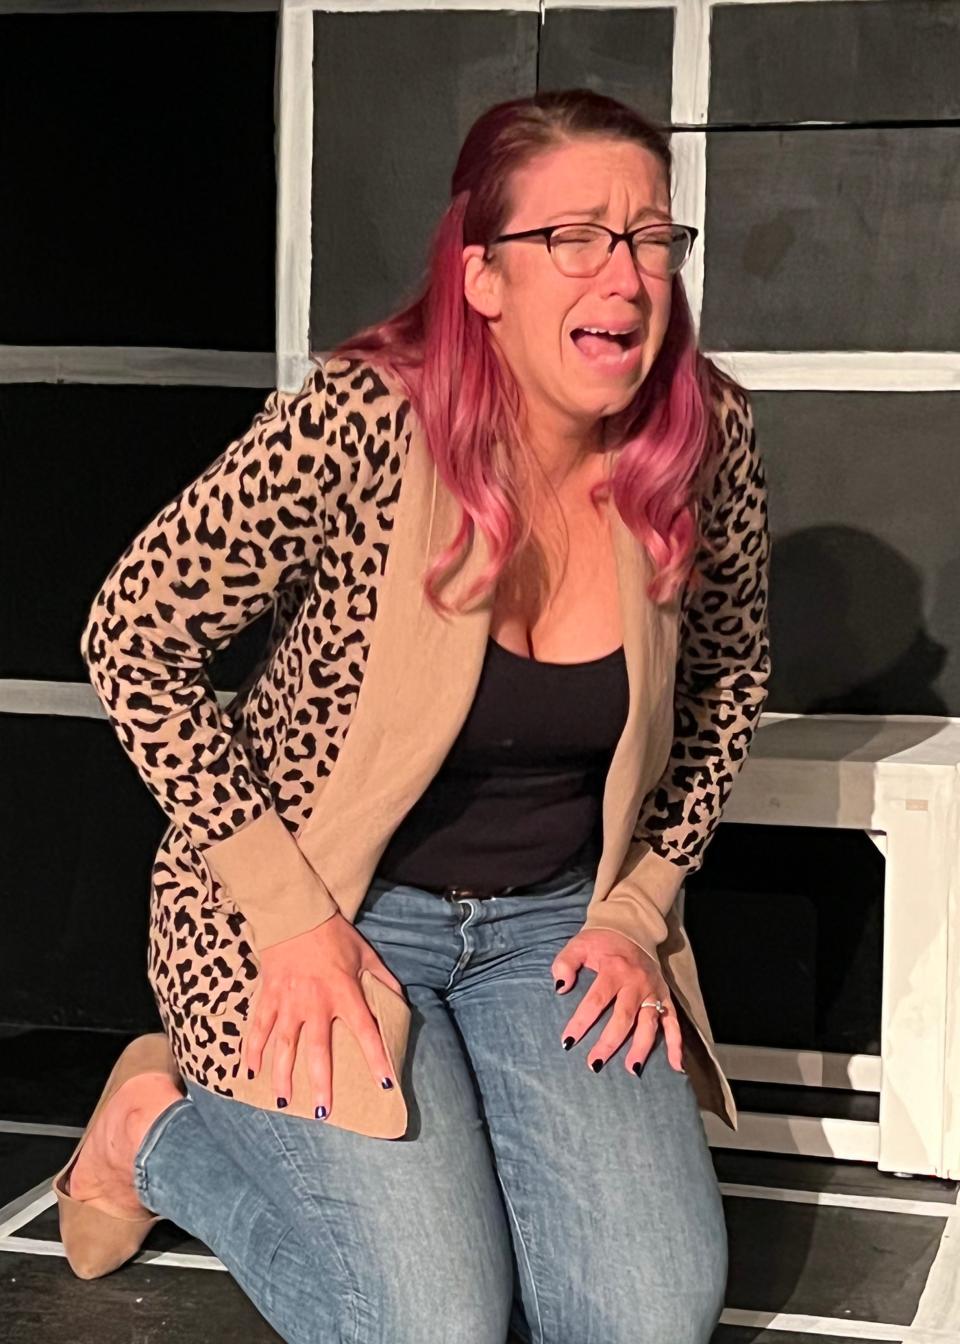 Erin Thomas-Lopatosky rehearses for Curtain Call Theatre's "The Curious Incident of the Dog in the Night-Time."